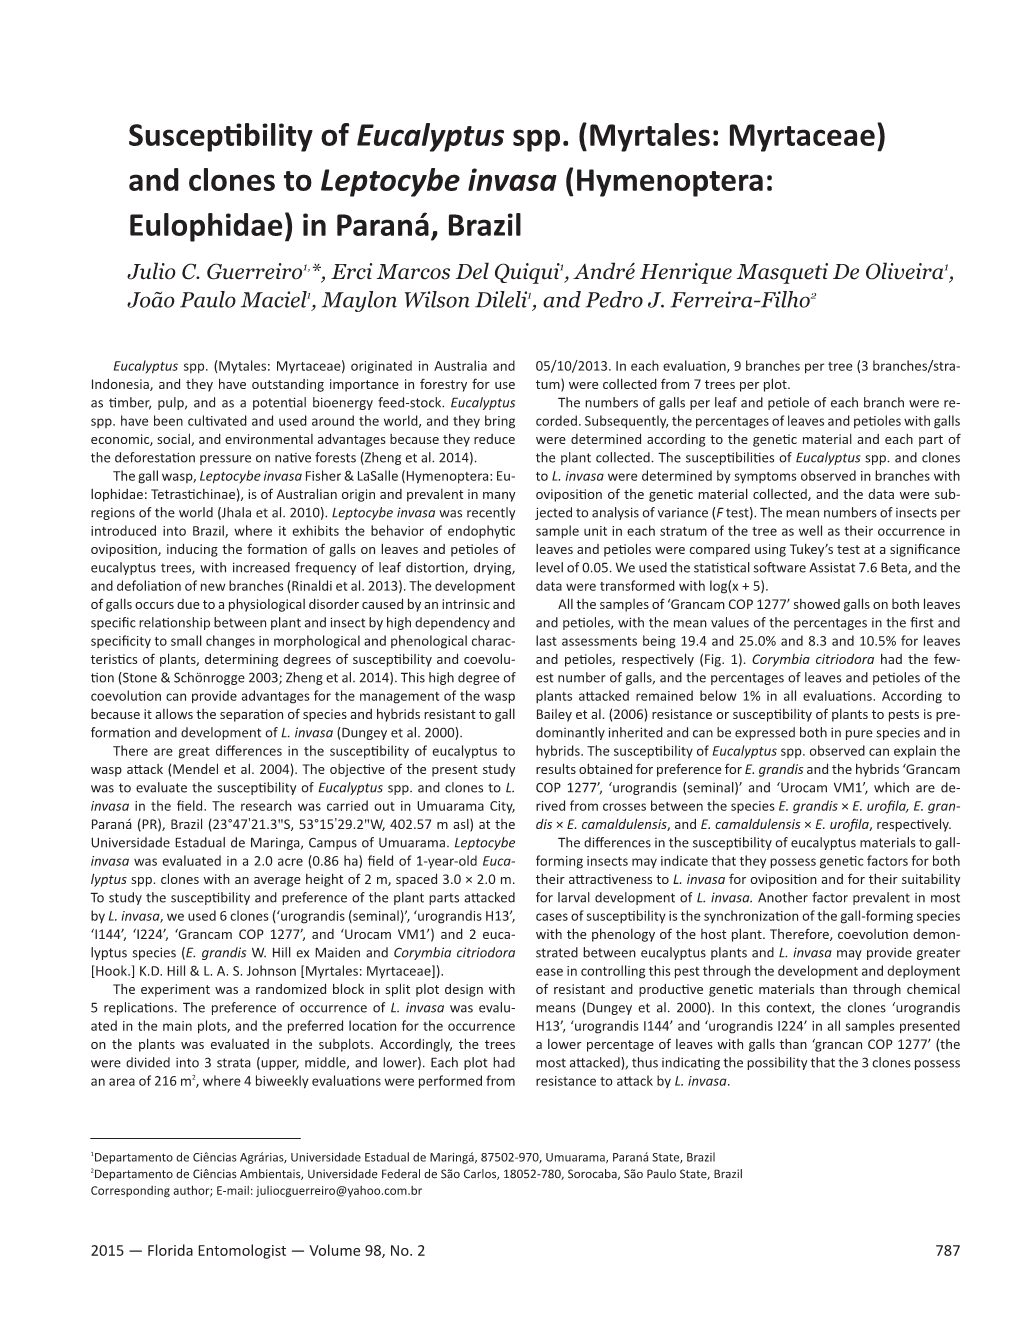 Susceptibility of Eucalyptus Spp. (Myrtales: Myrtaceae) and Clones to Leptocybe Invasa (Hymenoptera: Eulophidae) in Paraná